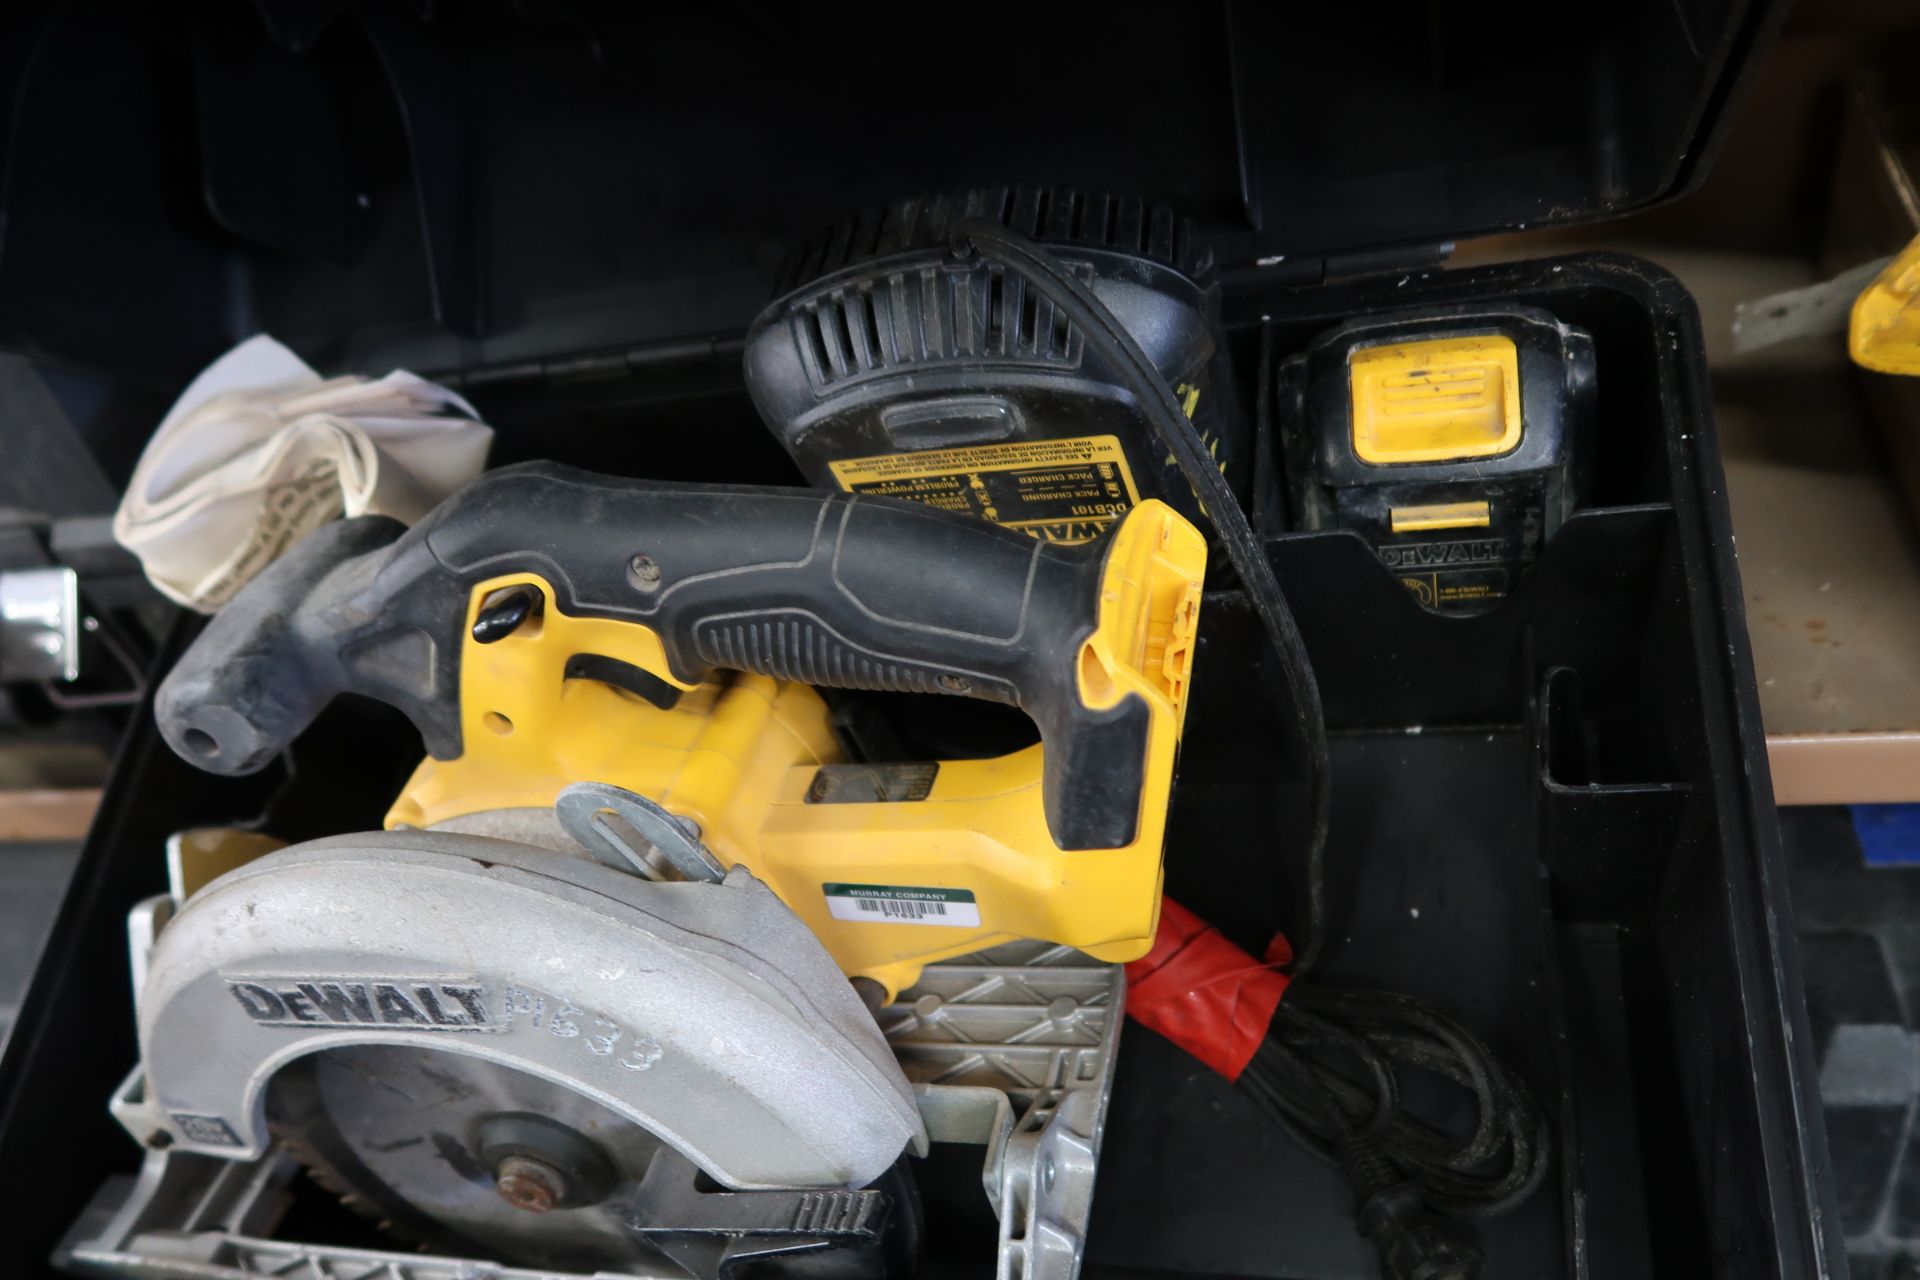 DeWalt 20Volt Cordless Circular Saws and Portable Band Saws (4) w/ Chargers - NO BATTERIES) (SOLD - Image 4 of 6